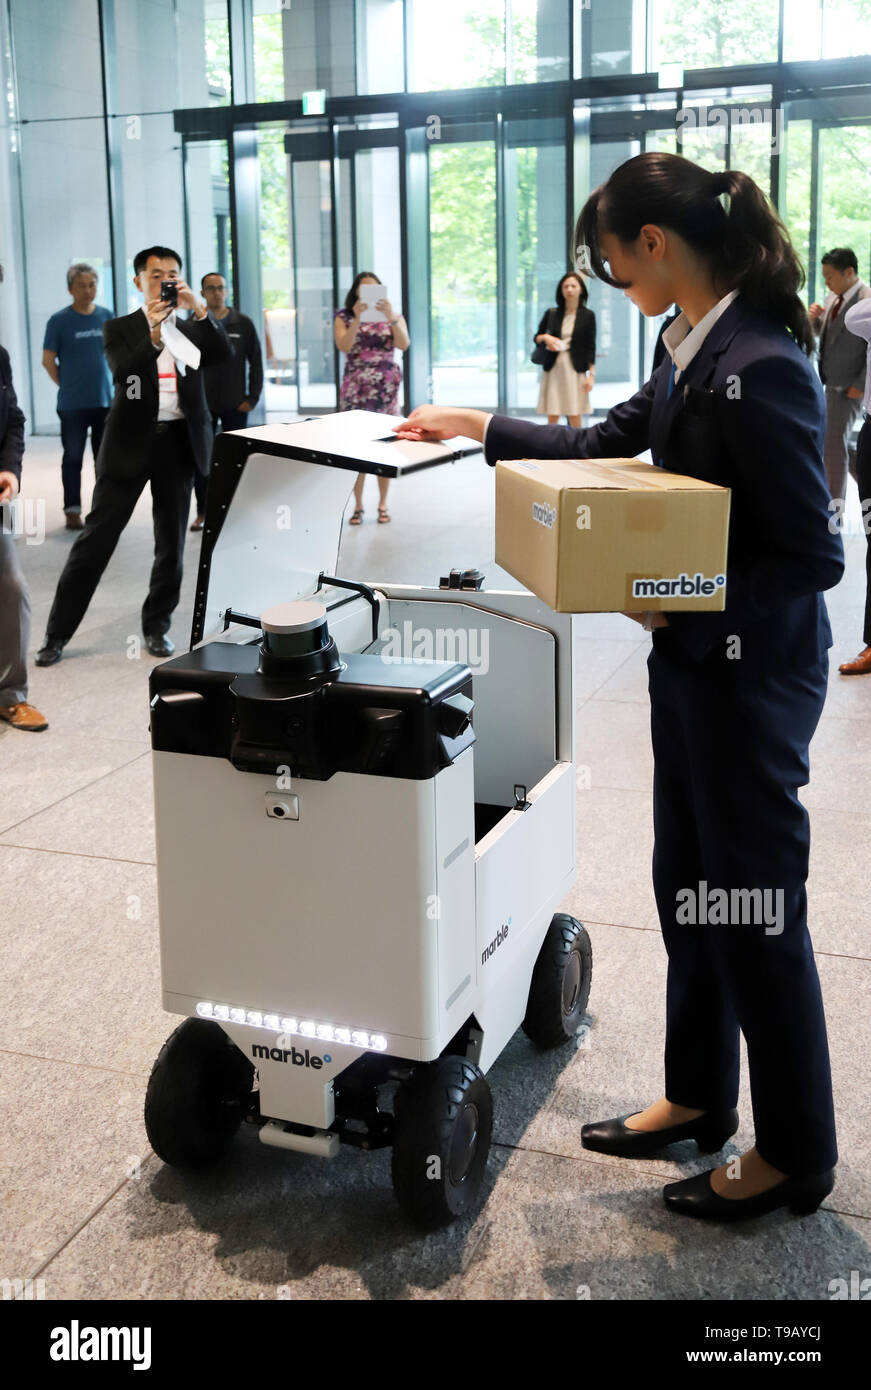 Tokyo, Japan. 17th May, 2019. Japan's Mitsubishi Estate US robotics venture Marble's delivery robot "Marble" which has LiDAR sensors and cameras to drive autonomously at the company's office buildings Tokyo's